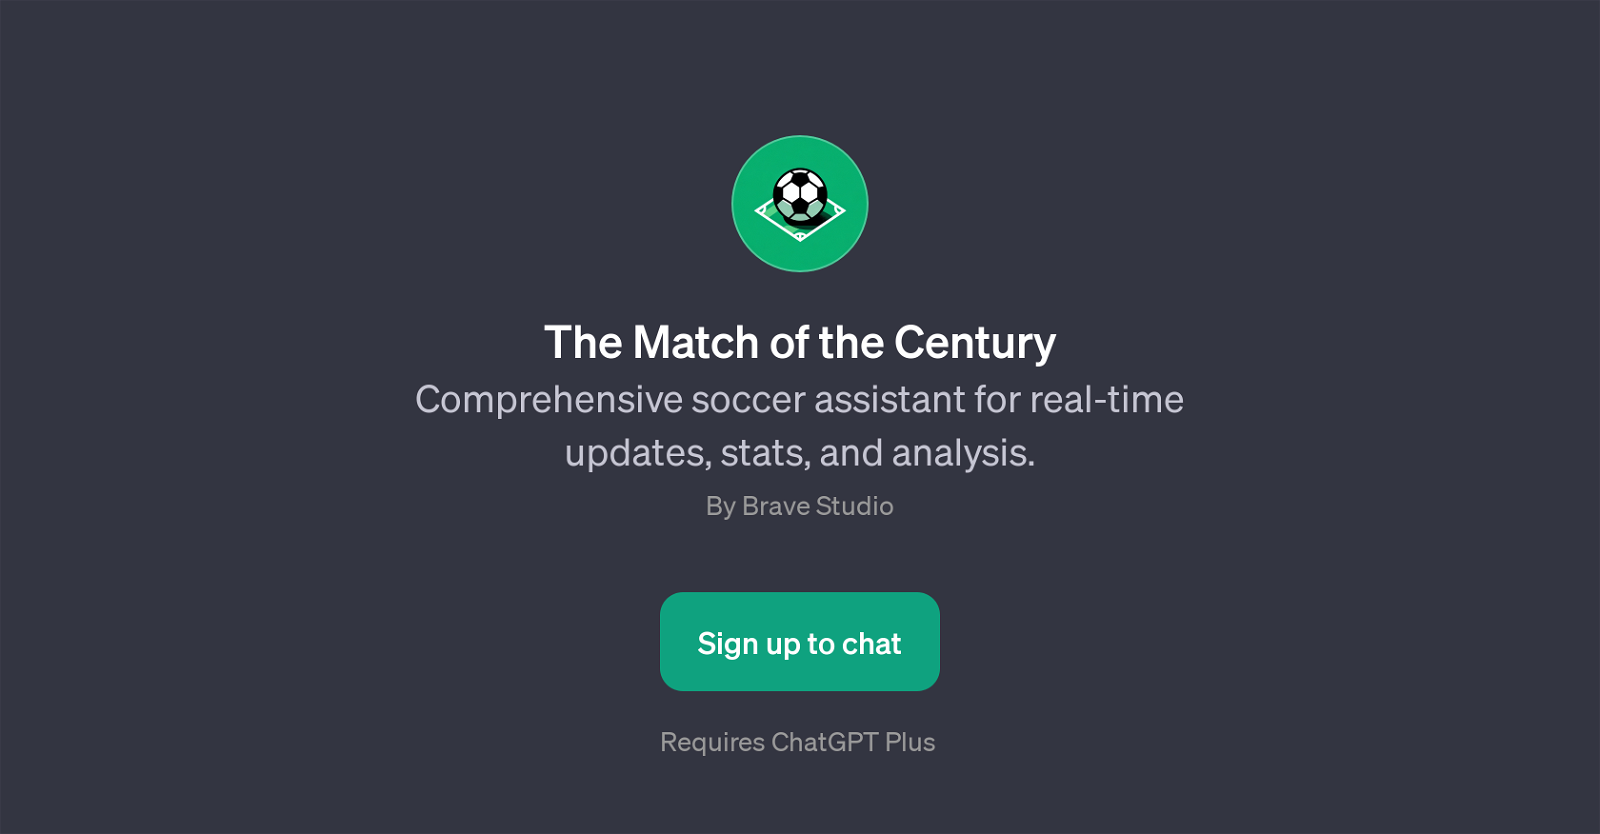 The Match of the Century website